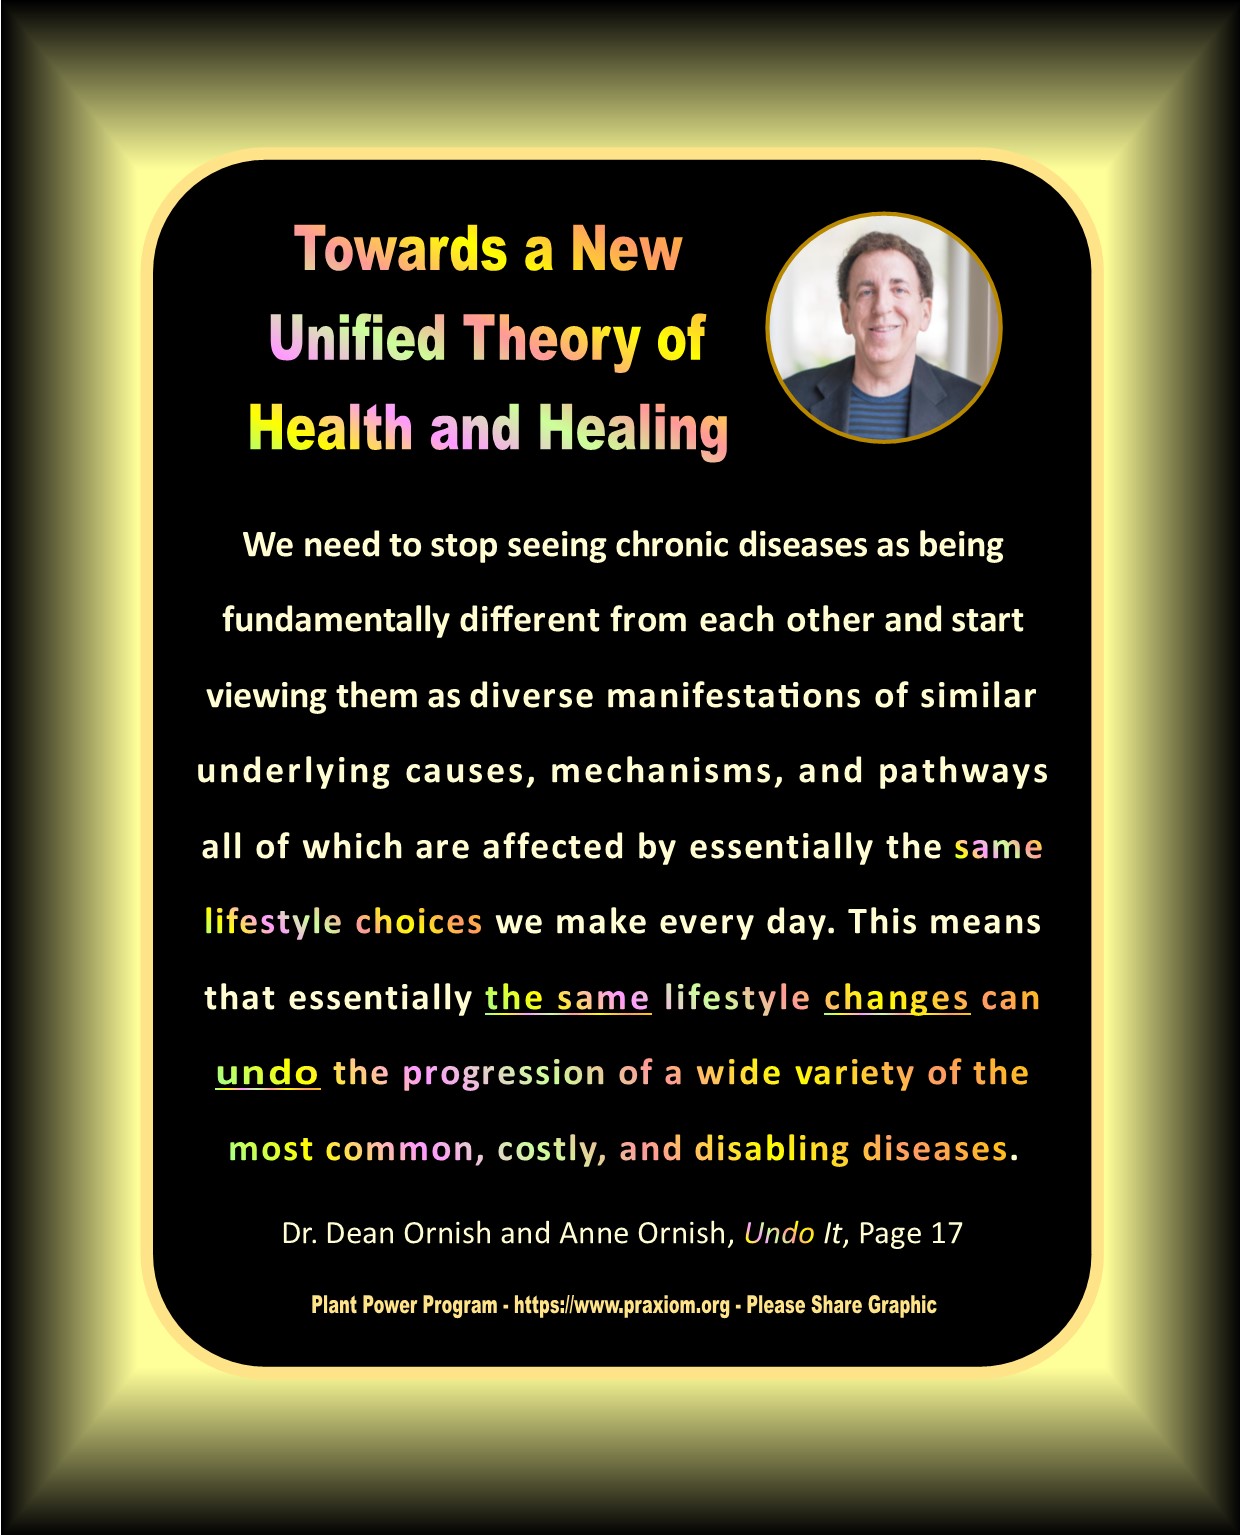 Towards a
        New Unified Theory of Health and Healing - Ornish